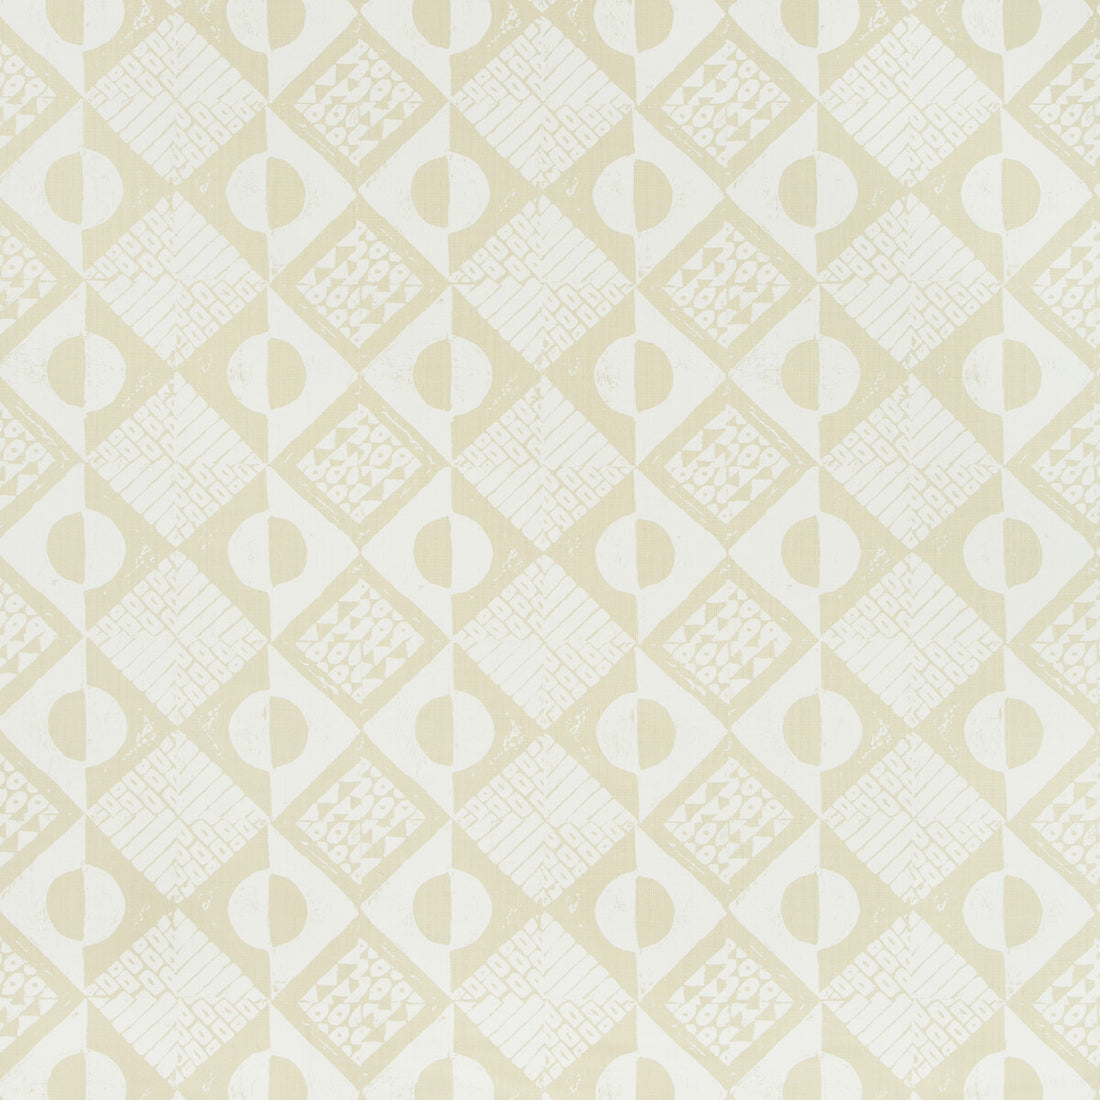 Circles And Squares fabric in off white color - pattern BFC-3666.1.0 - by Lee Jofa in the Blithfield collection